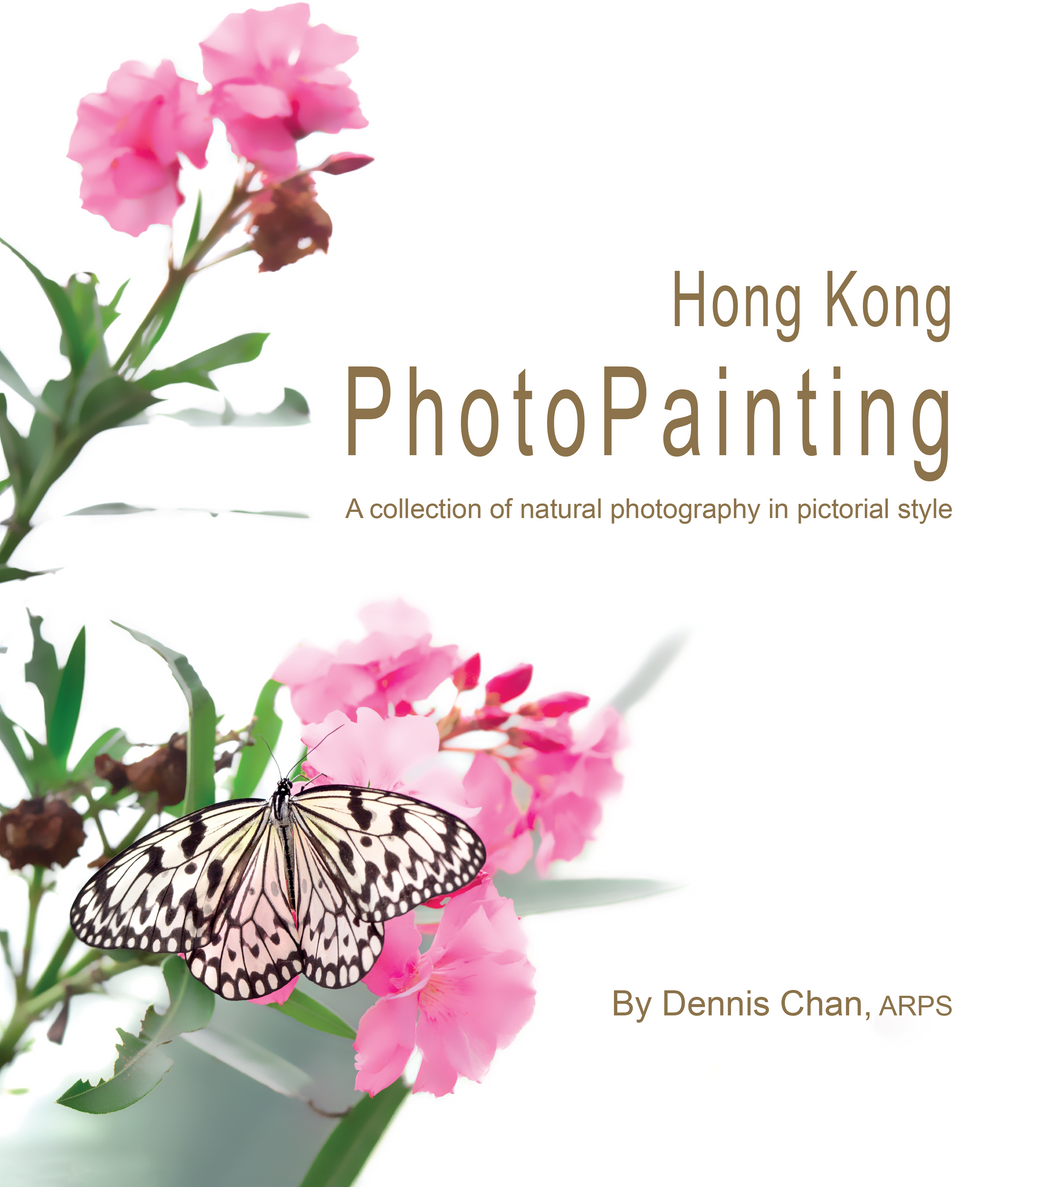 PhotoPainting book